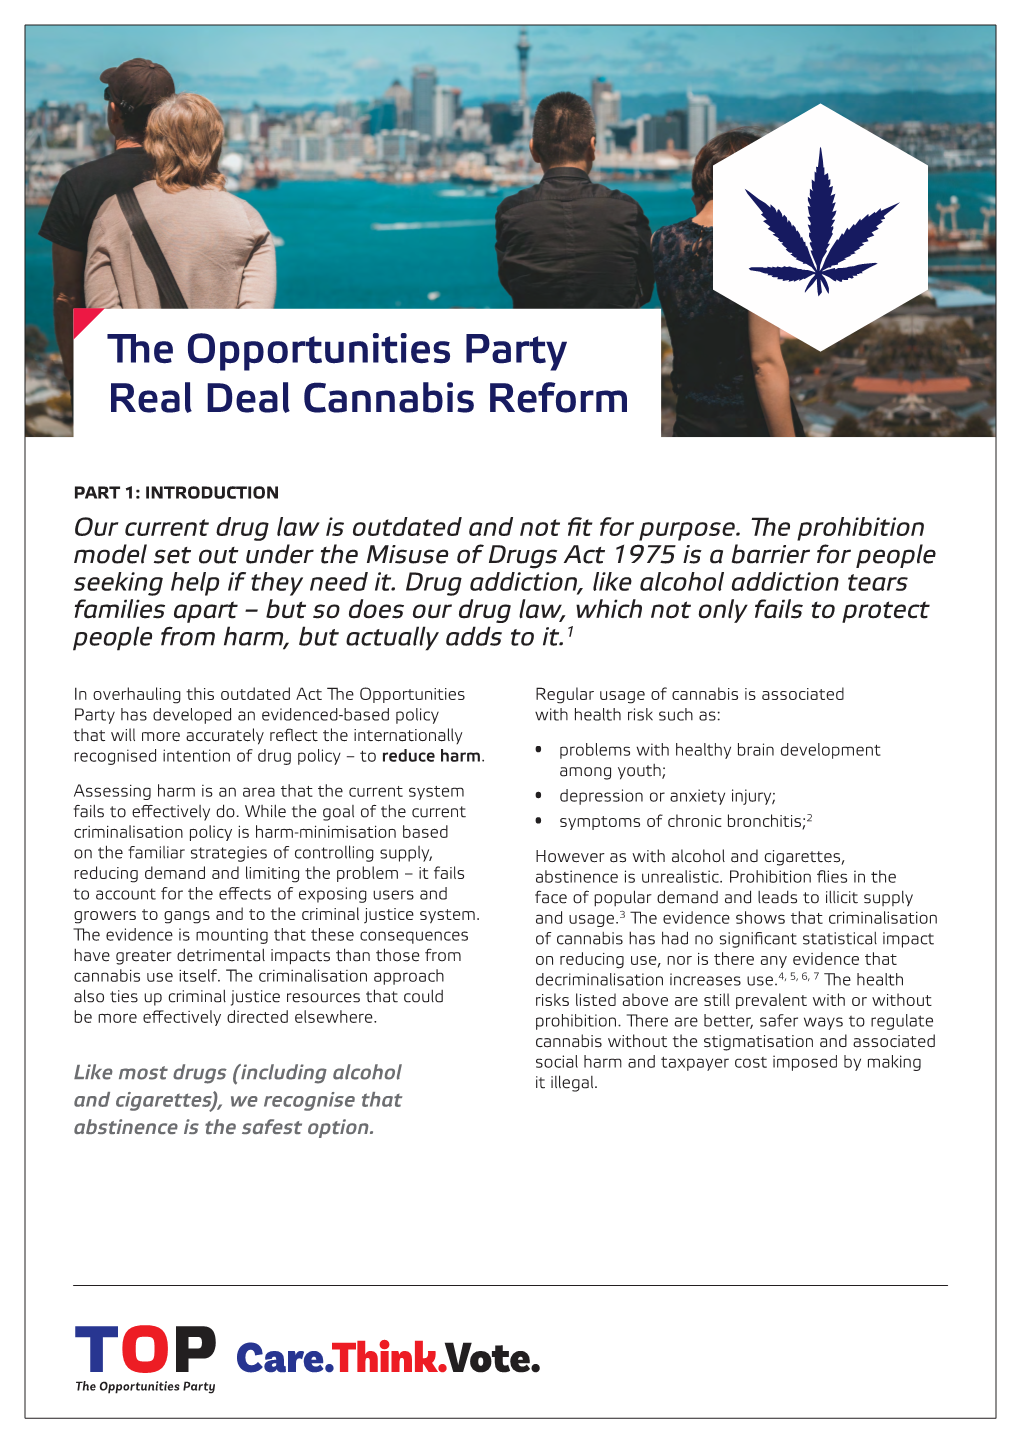 The Opportunities Party Real Deal Cannabis Reform